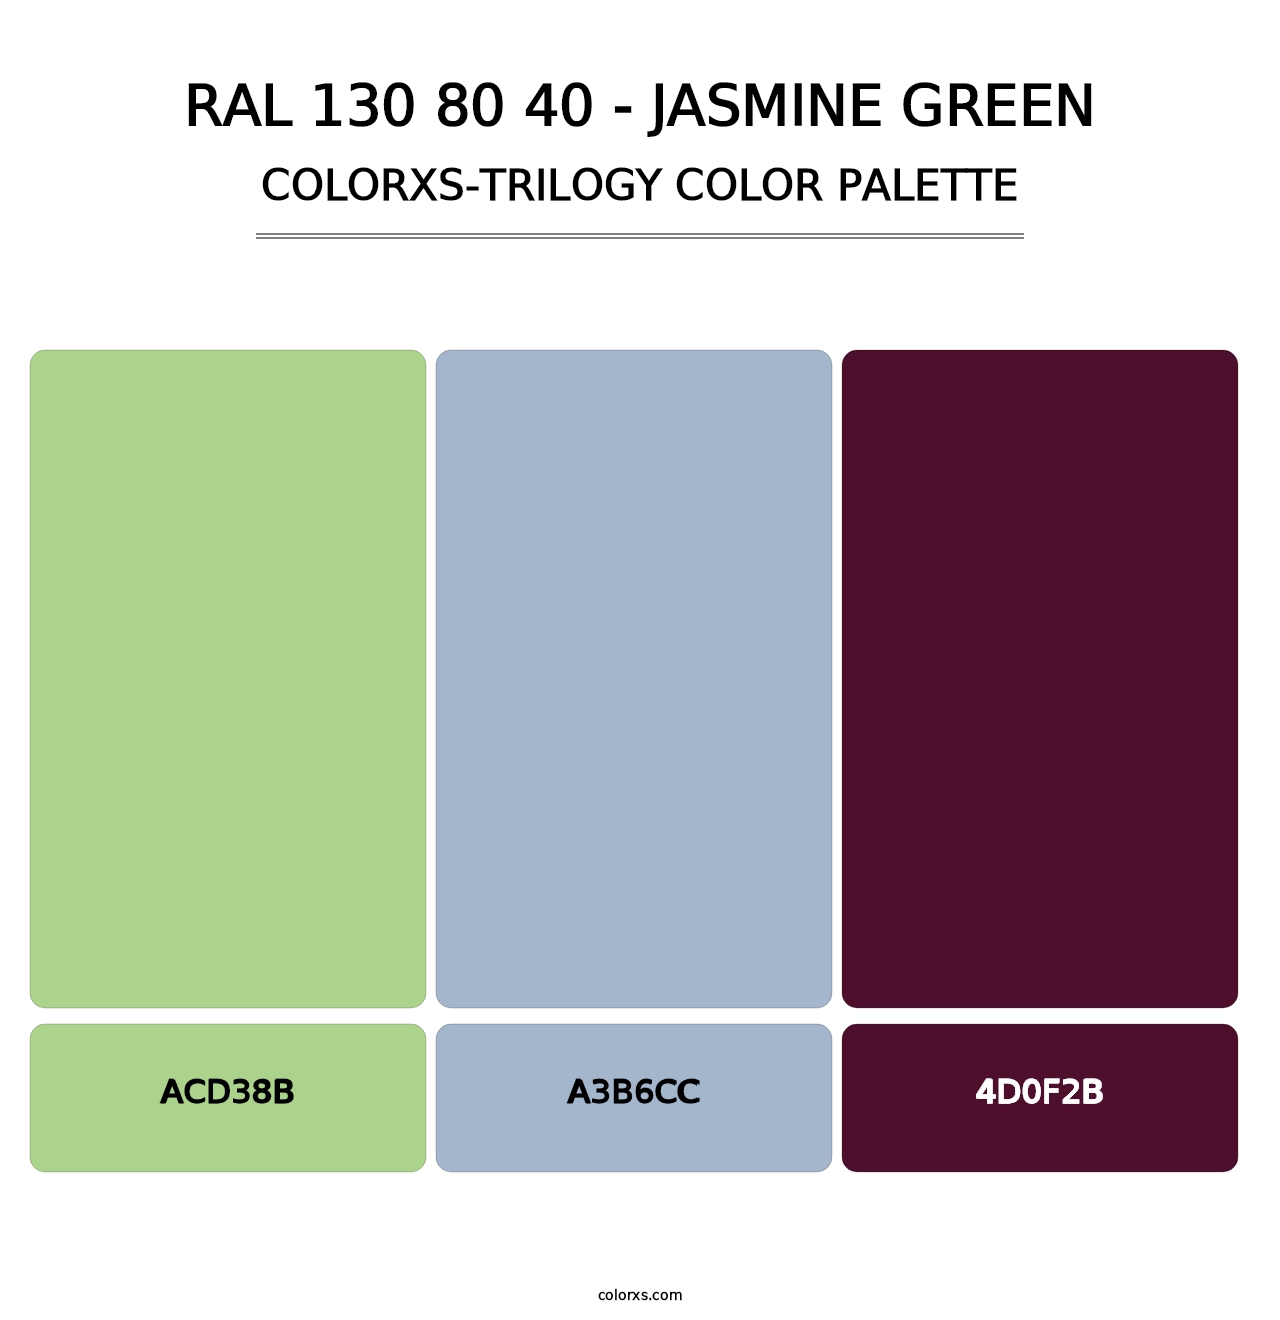 RAL 130 80 40 - Jasmine Green - Colorxs Trilogy Palette